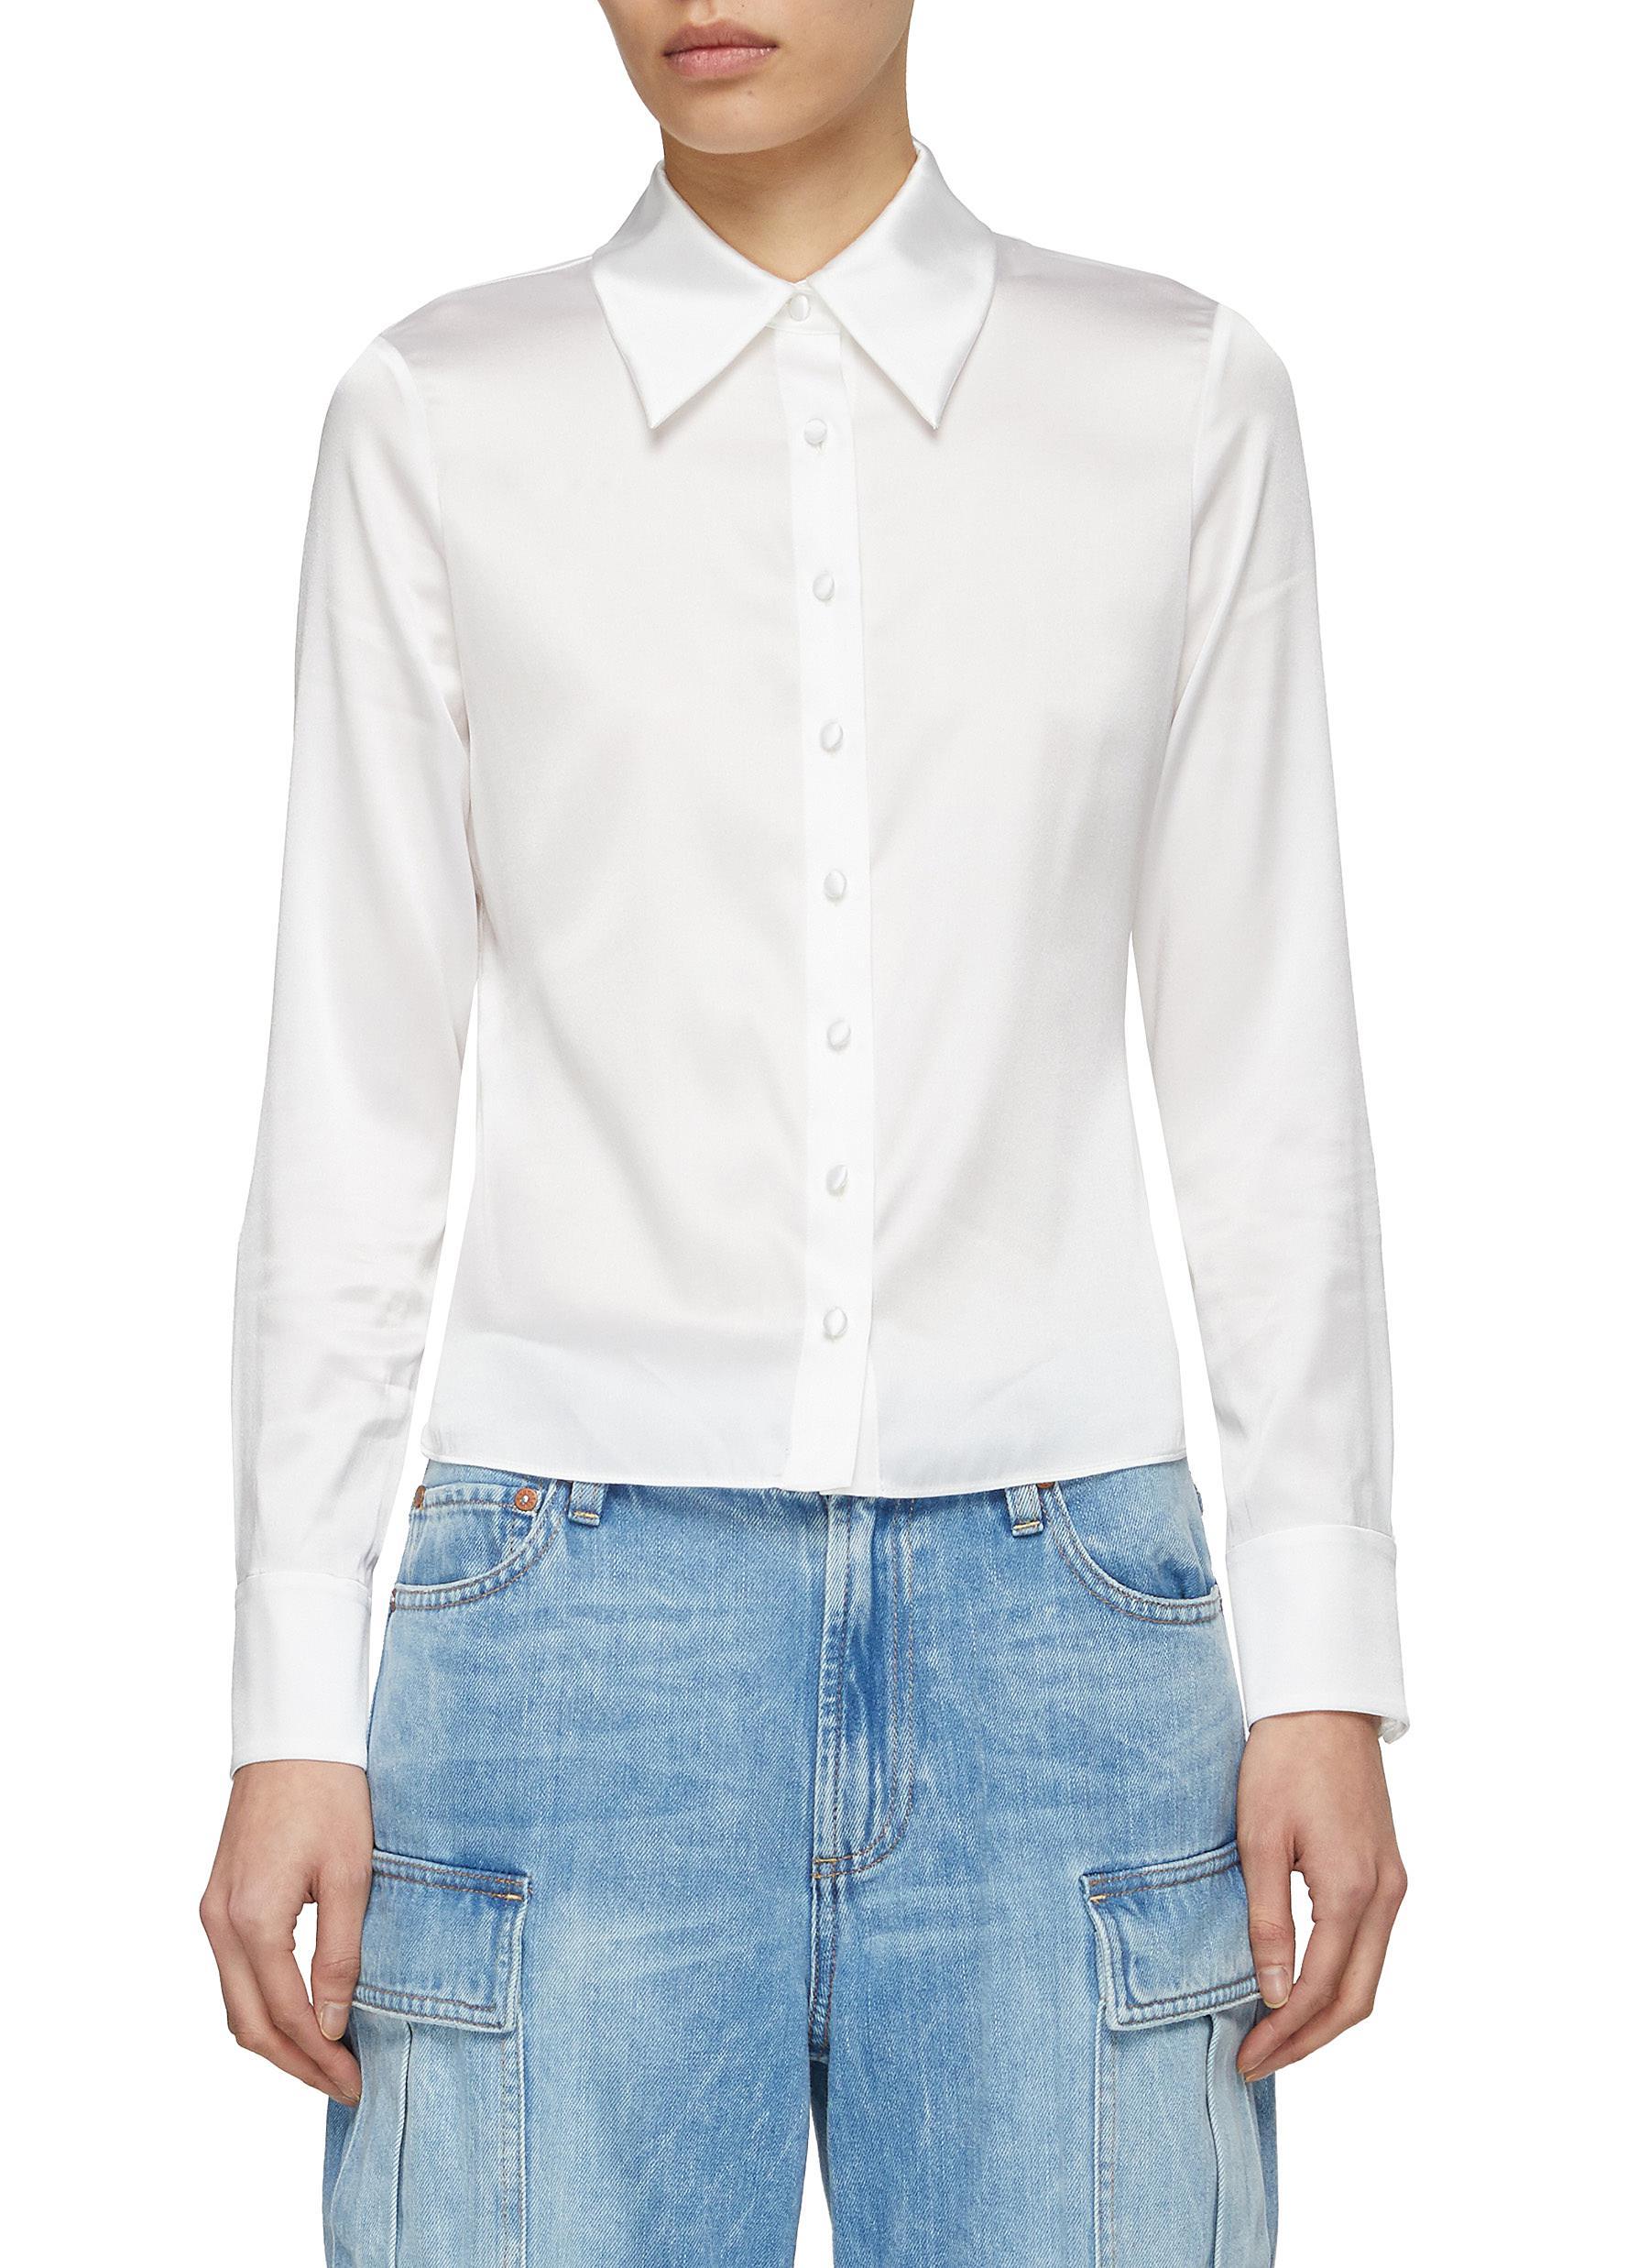 Alice + Olivia 'willa' 1970's Silky Suiting Shirt in White | Lyst